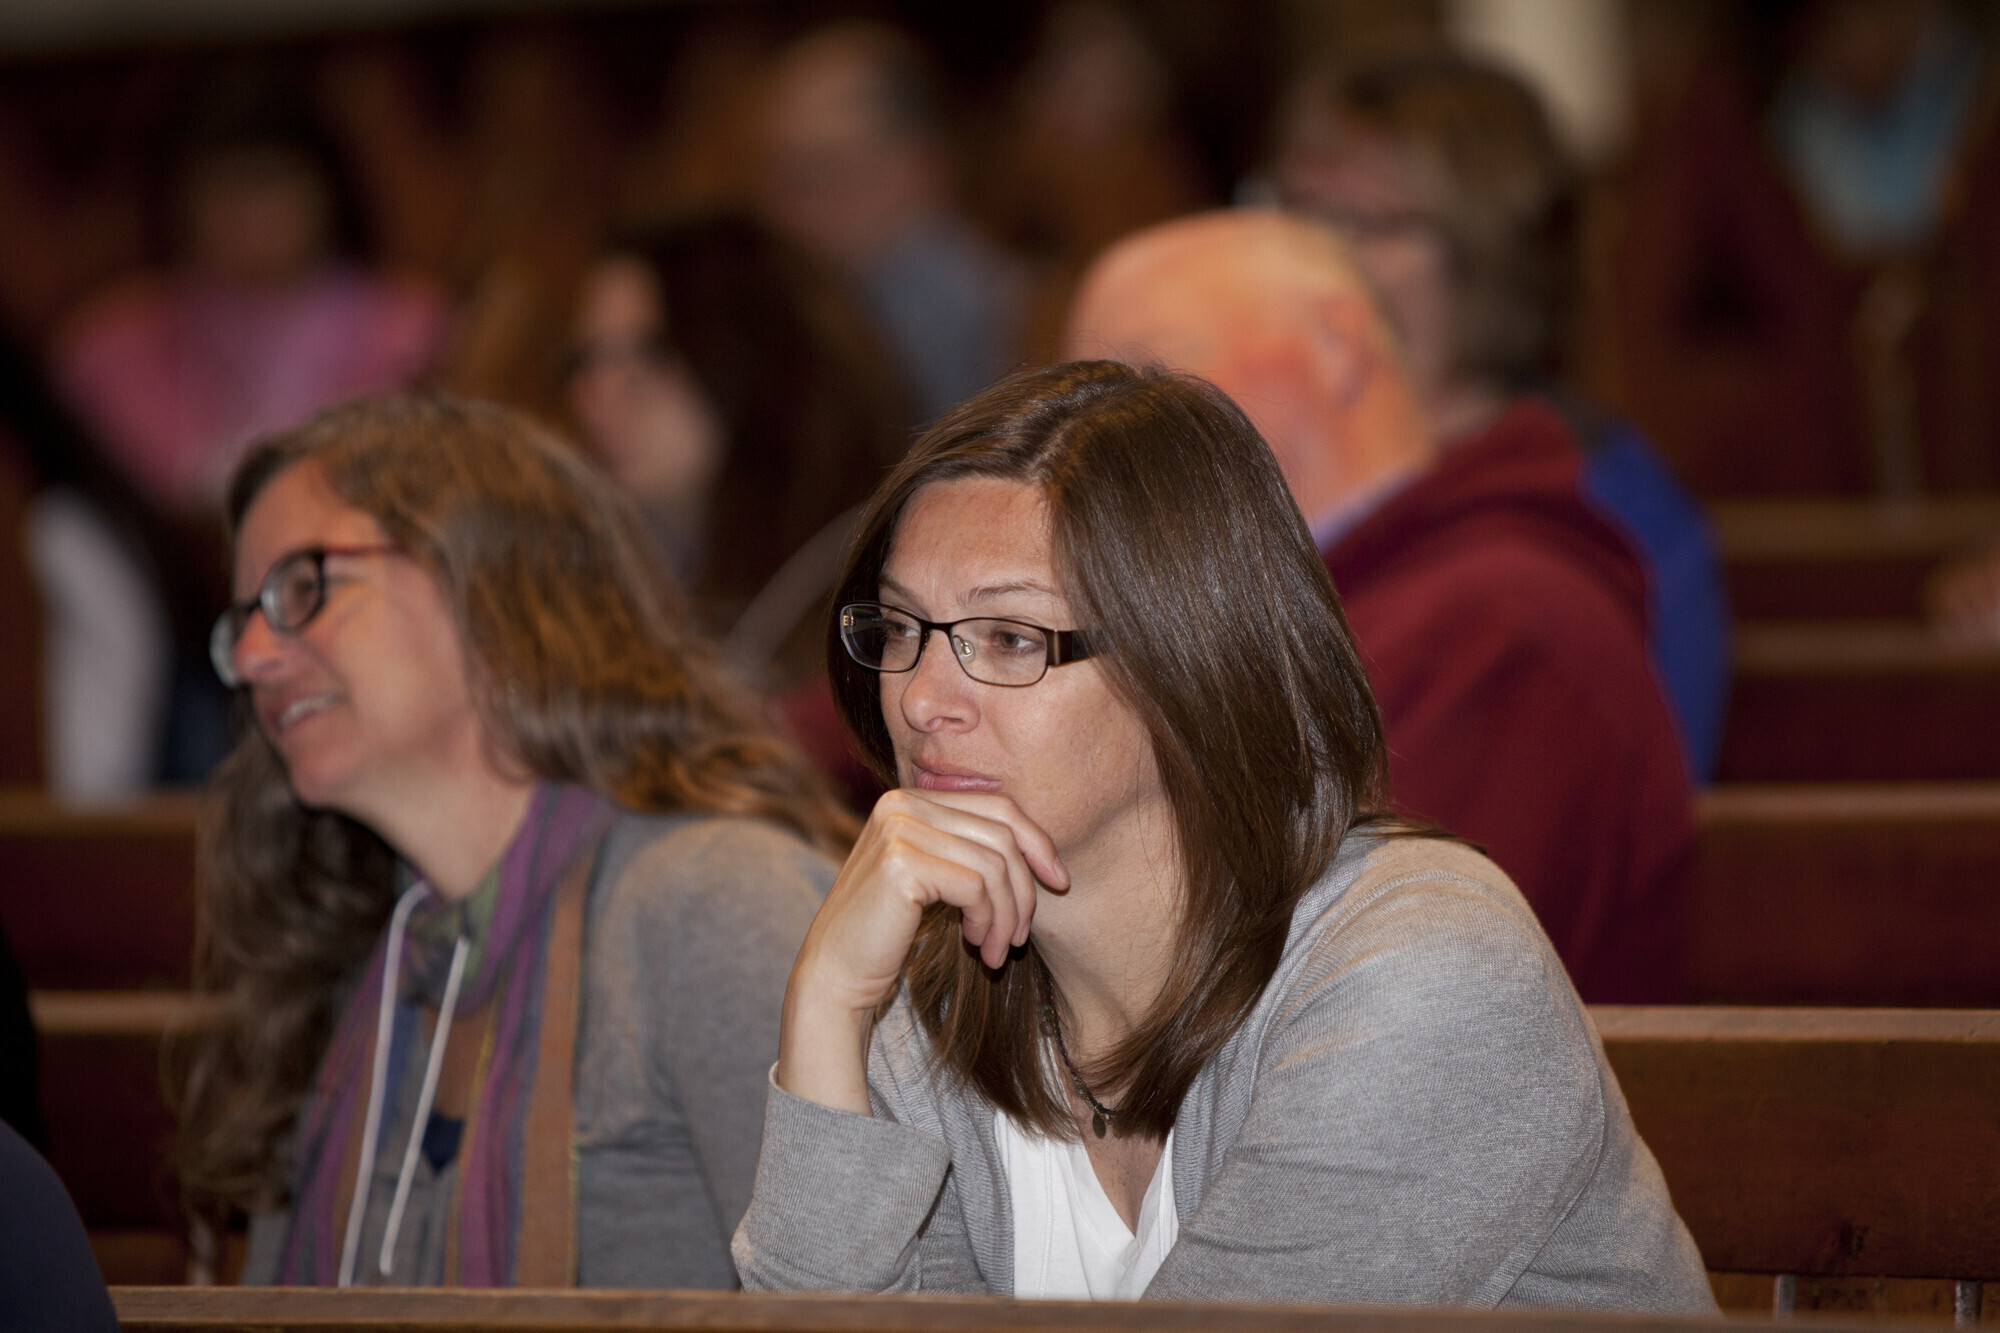 A woman listening to a someone speaking at an event